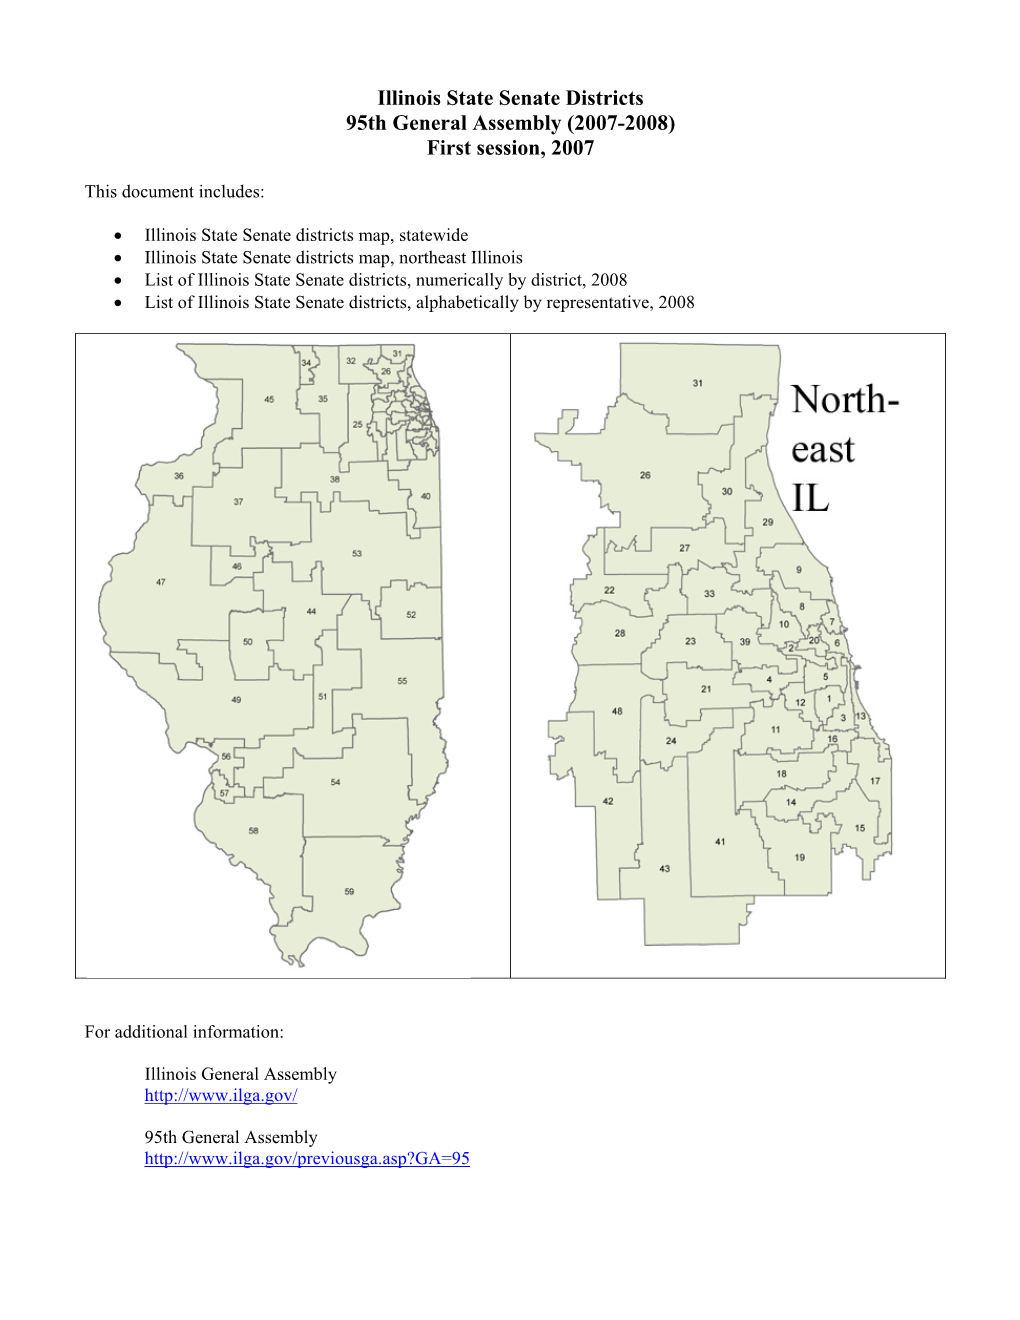 Illinois State Senate Districts 95Th General Assembly (2007-2008) First Session, 2007